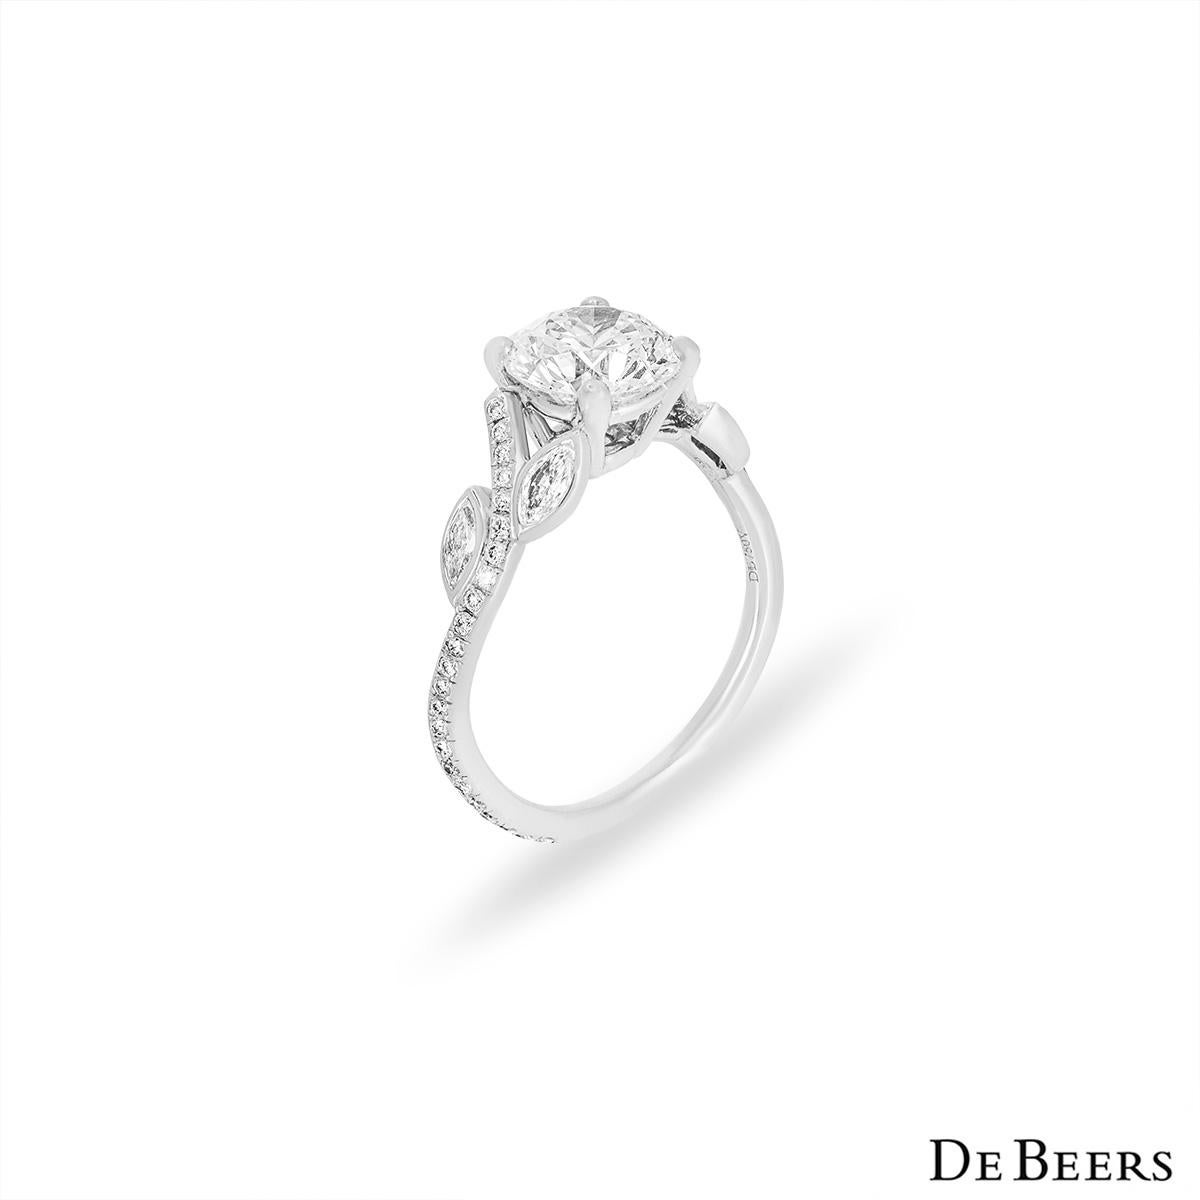 A platinum diamond ring from The Adonis Rose collection by De Beers. The central diamond weighs 1.04ct, is E colour and VS1 clarity. The centre stone is enhanced by the graceful diamond pave set mount, composed of round brilliant and marquise